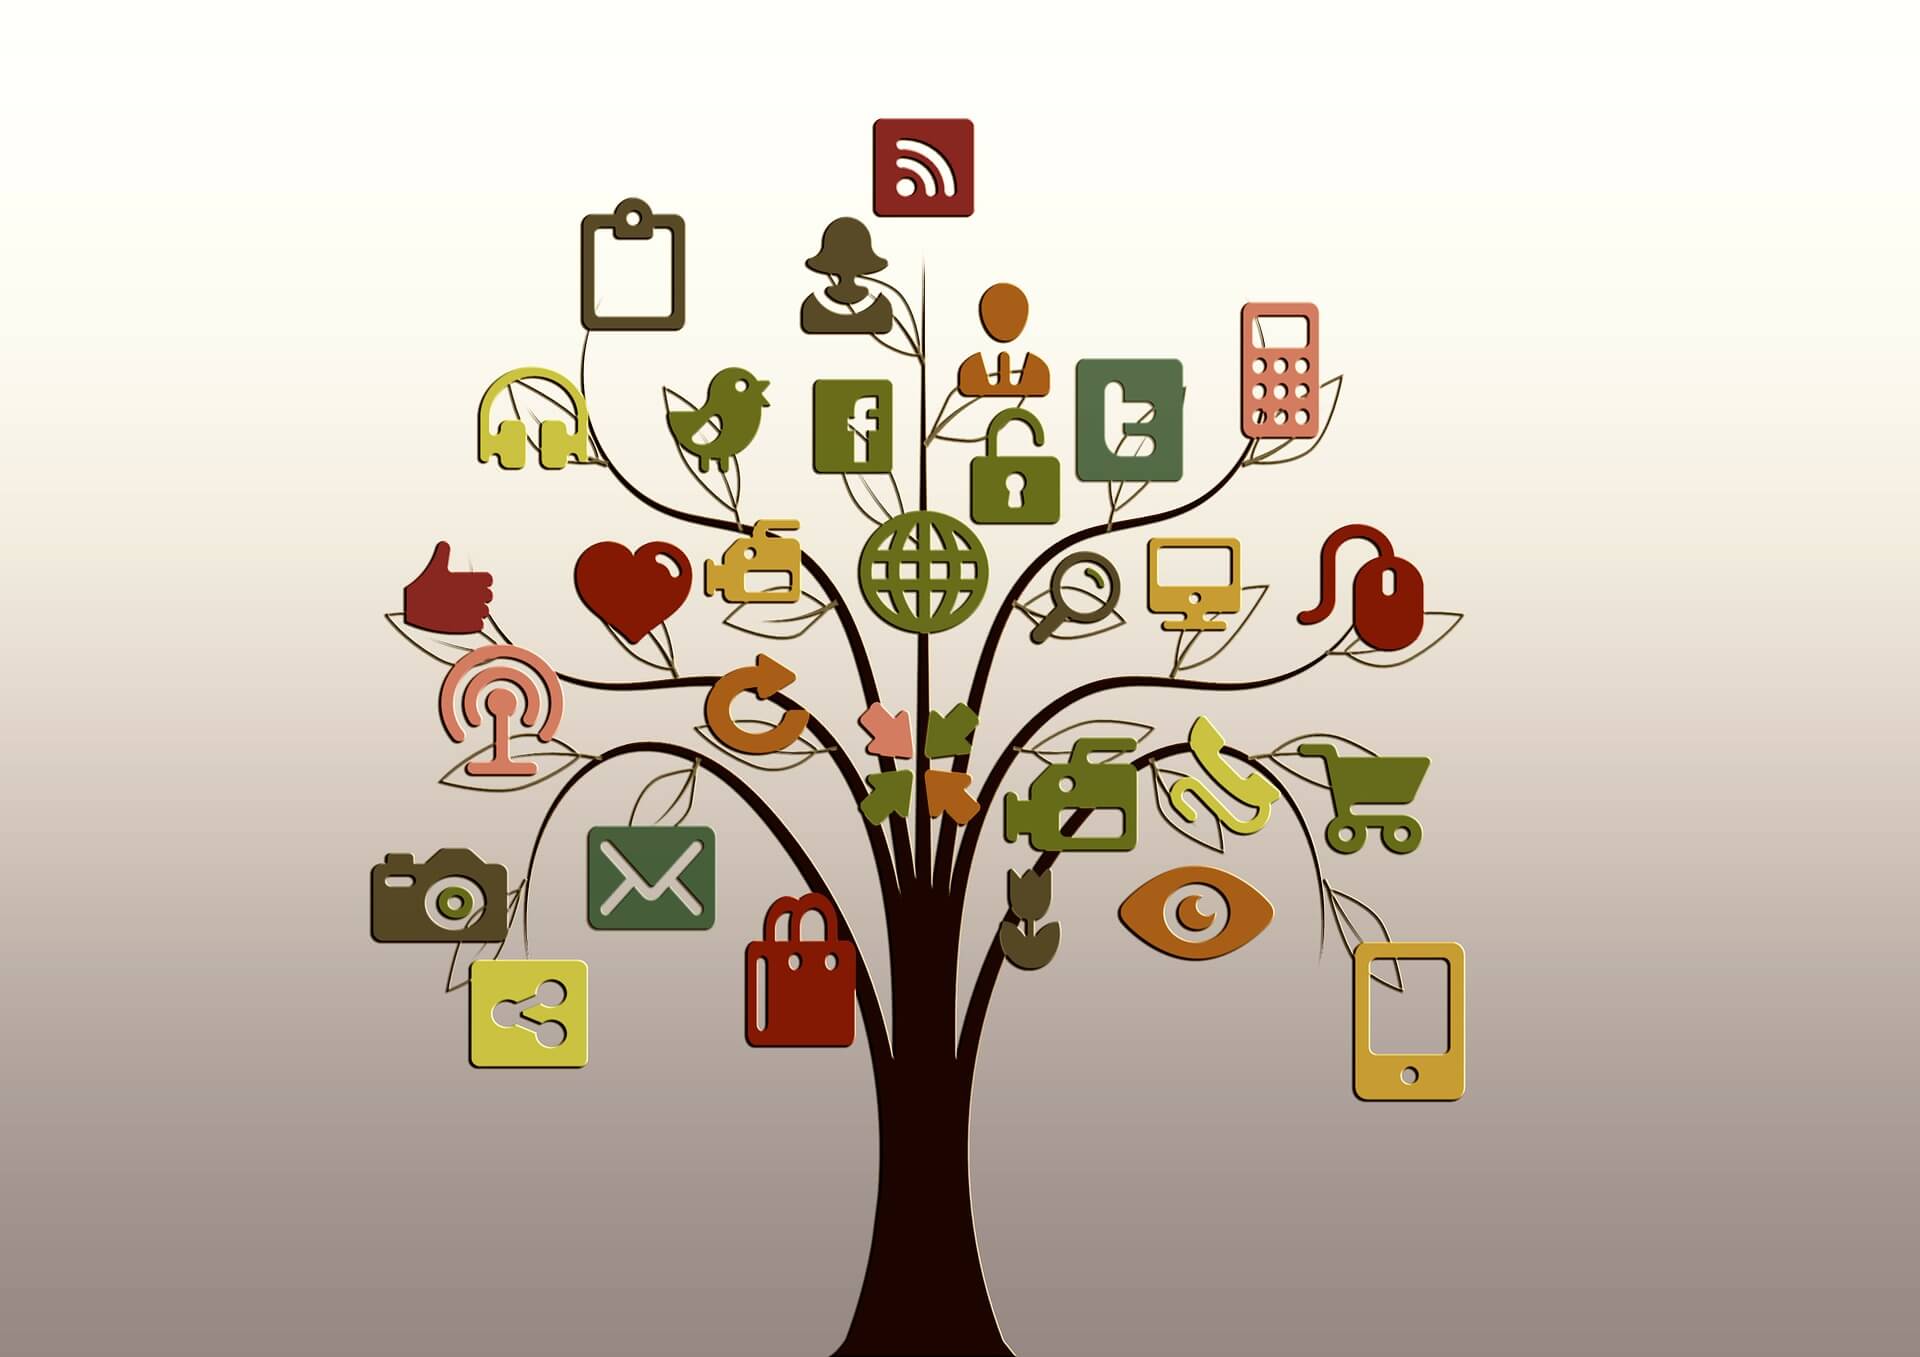 What Are the Major Roles of Social Media in Knowledge Creation?